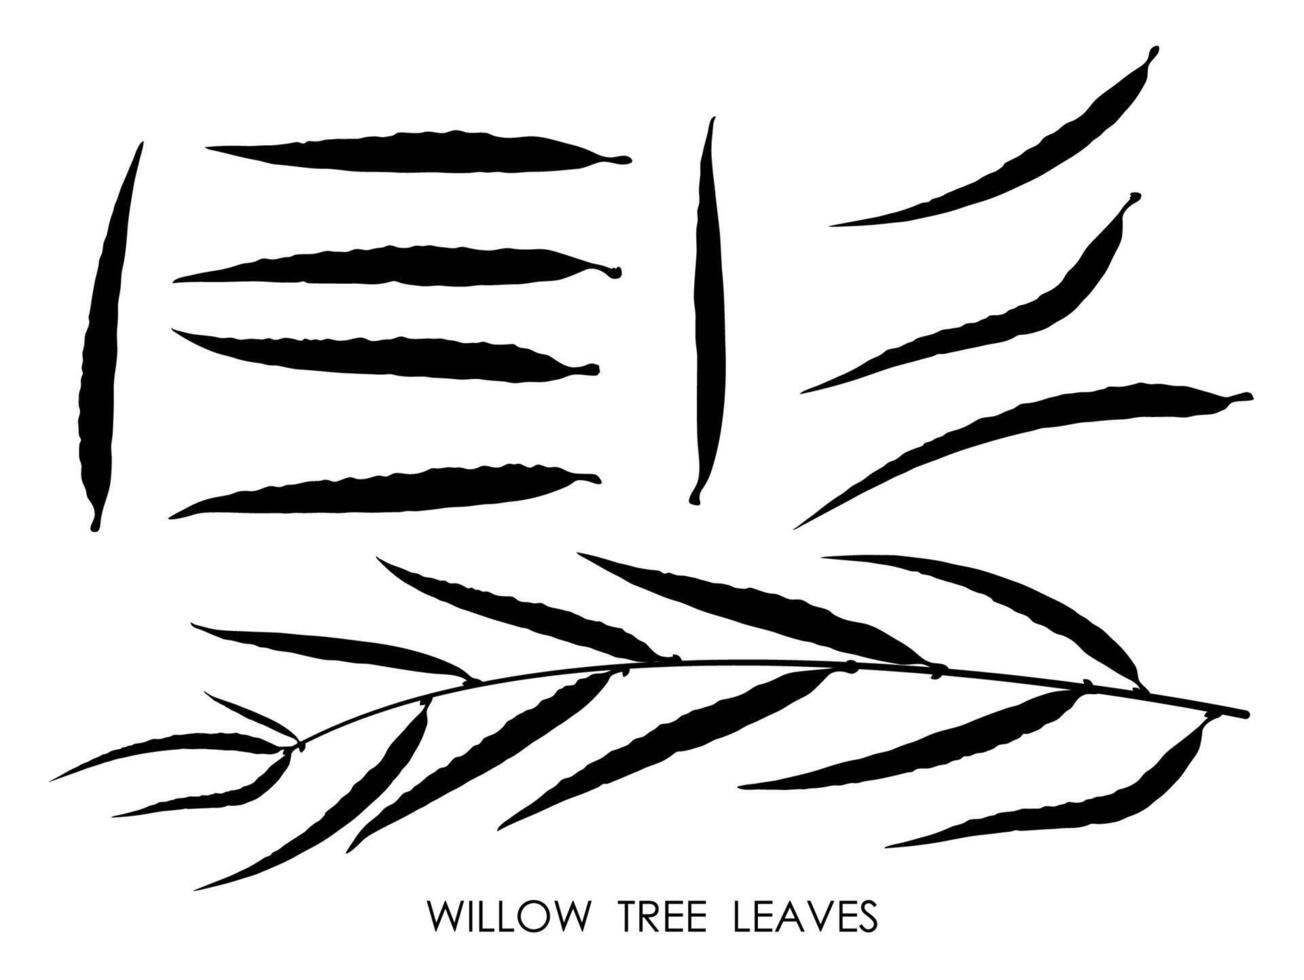 Black silhouettes of WILLOW tree leaves isolated on white. Autumn fallen leaves of WILLOW tree. Vector